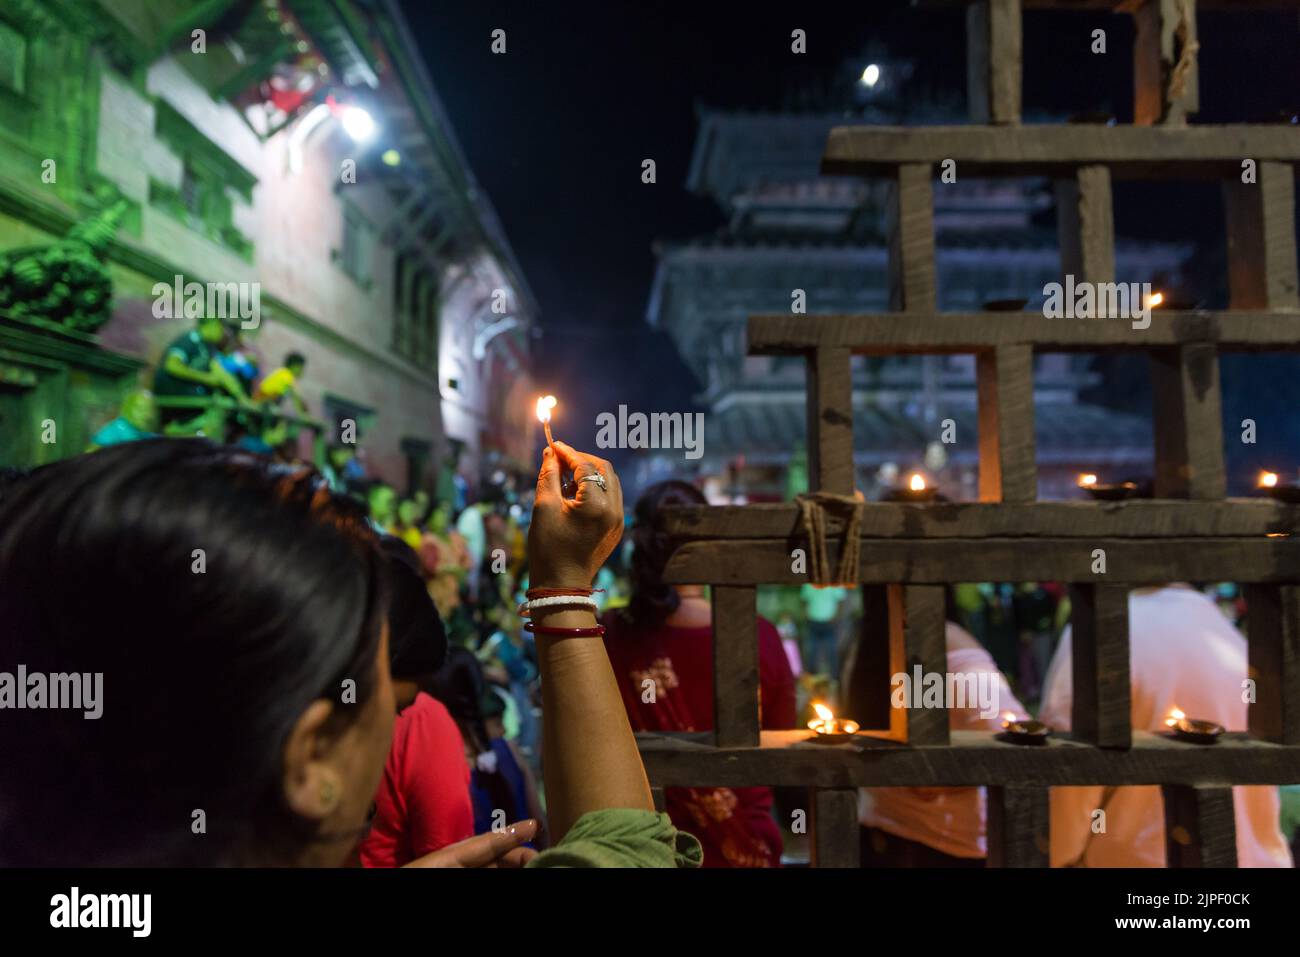 A devotee offering an oil lamp during the Bagh Bhairab festival celebration. On the occasion of the Bagh Bhairab festival, devotees circumambulate Bagh Bhairab Temple for 108 times for blessings with success and good health. Stock Photo